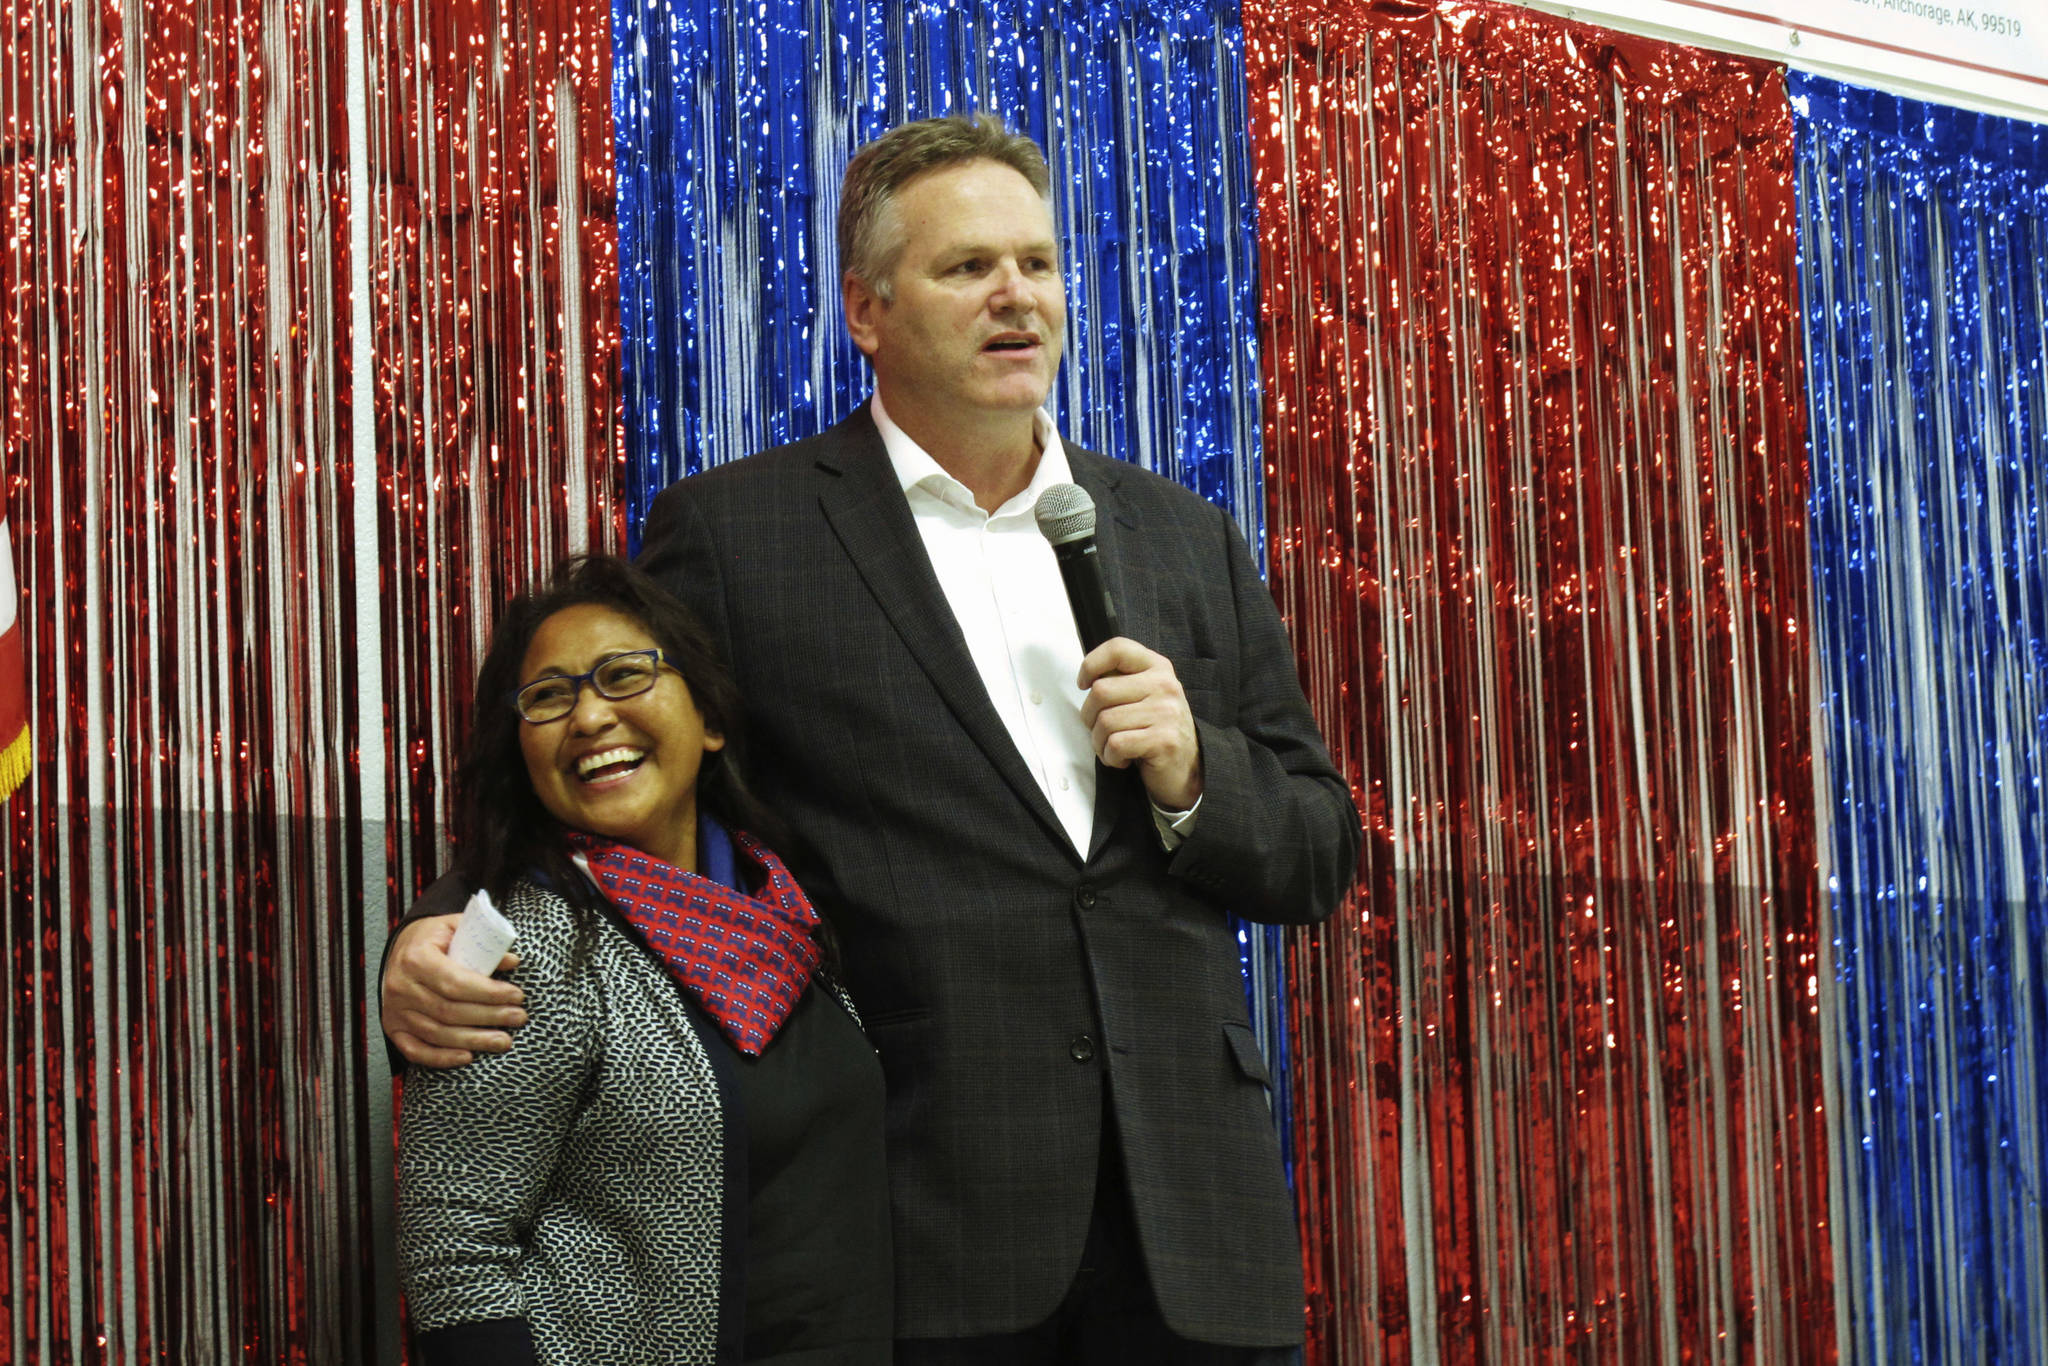 In this Nov. 4, 2018 file photo, Alaska Republican gubernatorial candidate Mike Dunleavy stands with his wife, Rose, on stage during a GOP rally in Anchorage, Alaska. Dunleavy was sworn in as governor on Monday, Dec. 3, days after a magnitude 7.0 earthquake rocked heavily populated Southcentral Alaska. (AP Photo/Becky Bohrer, File)